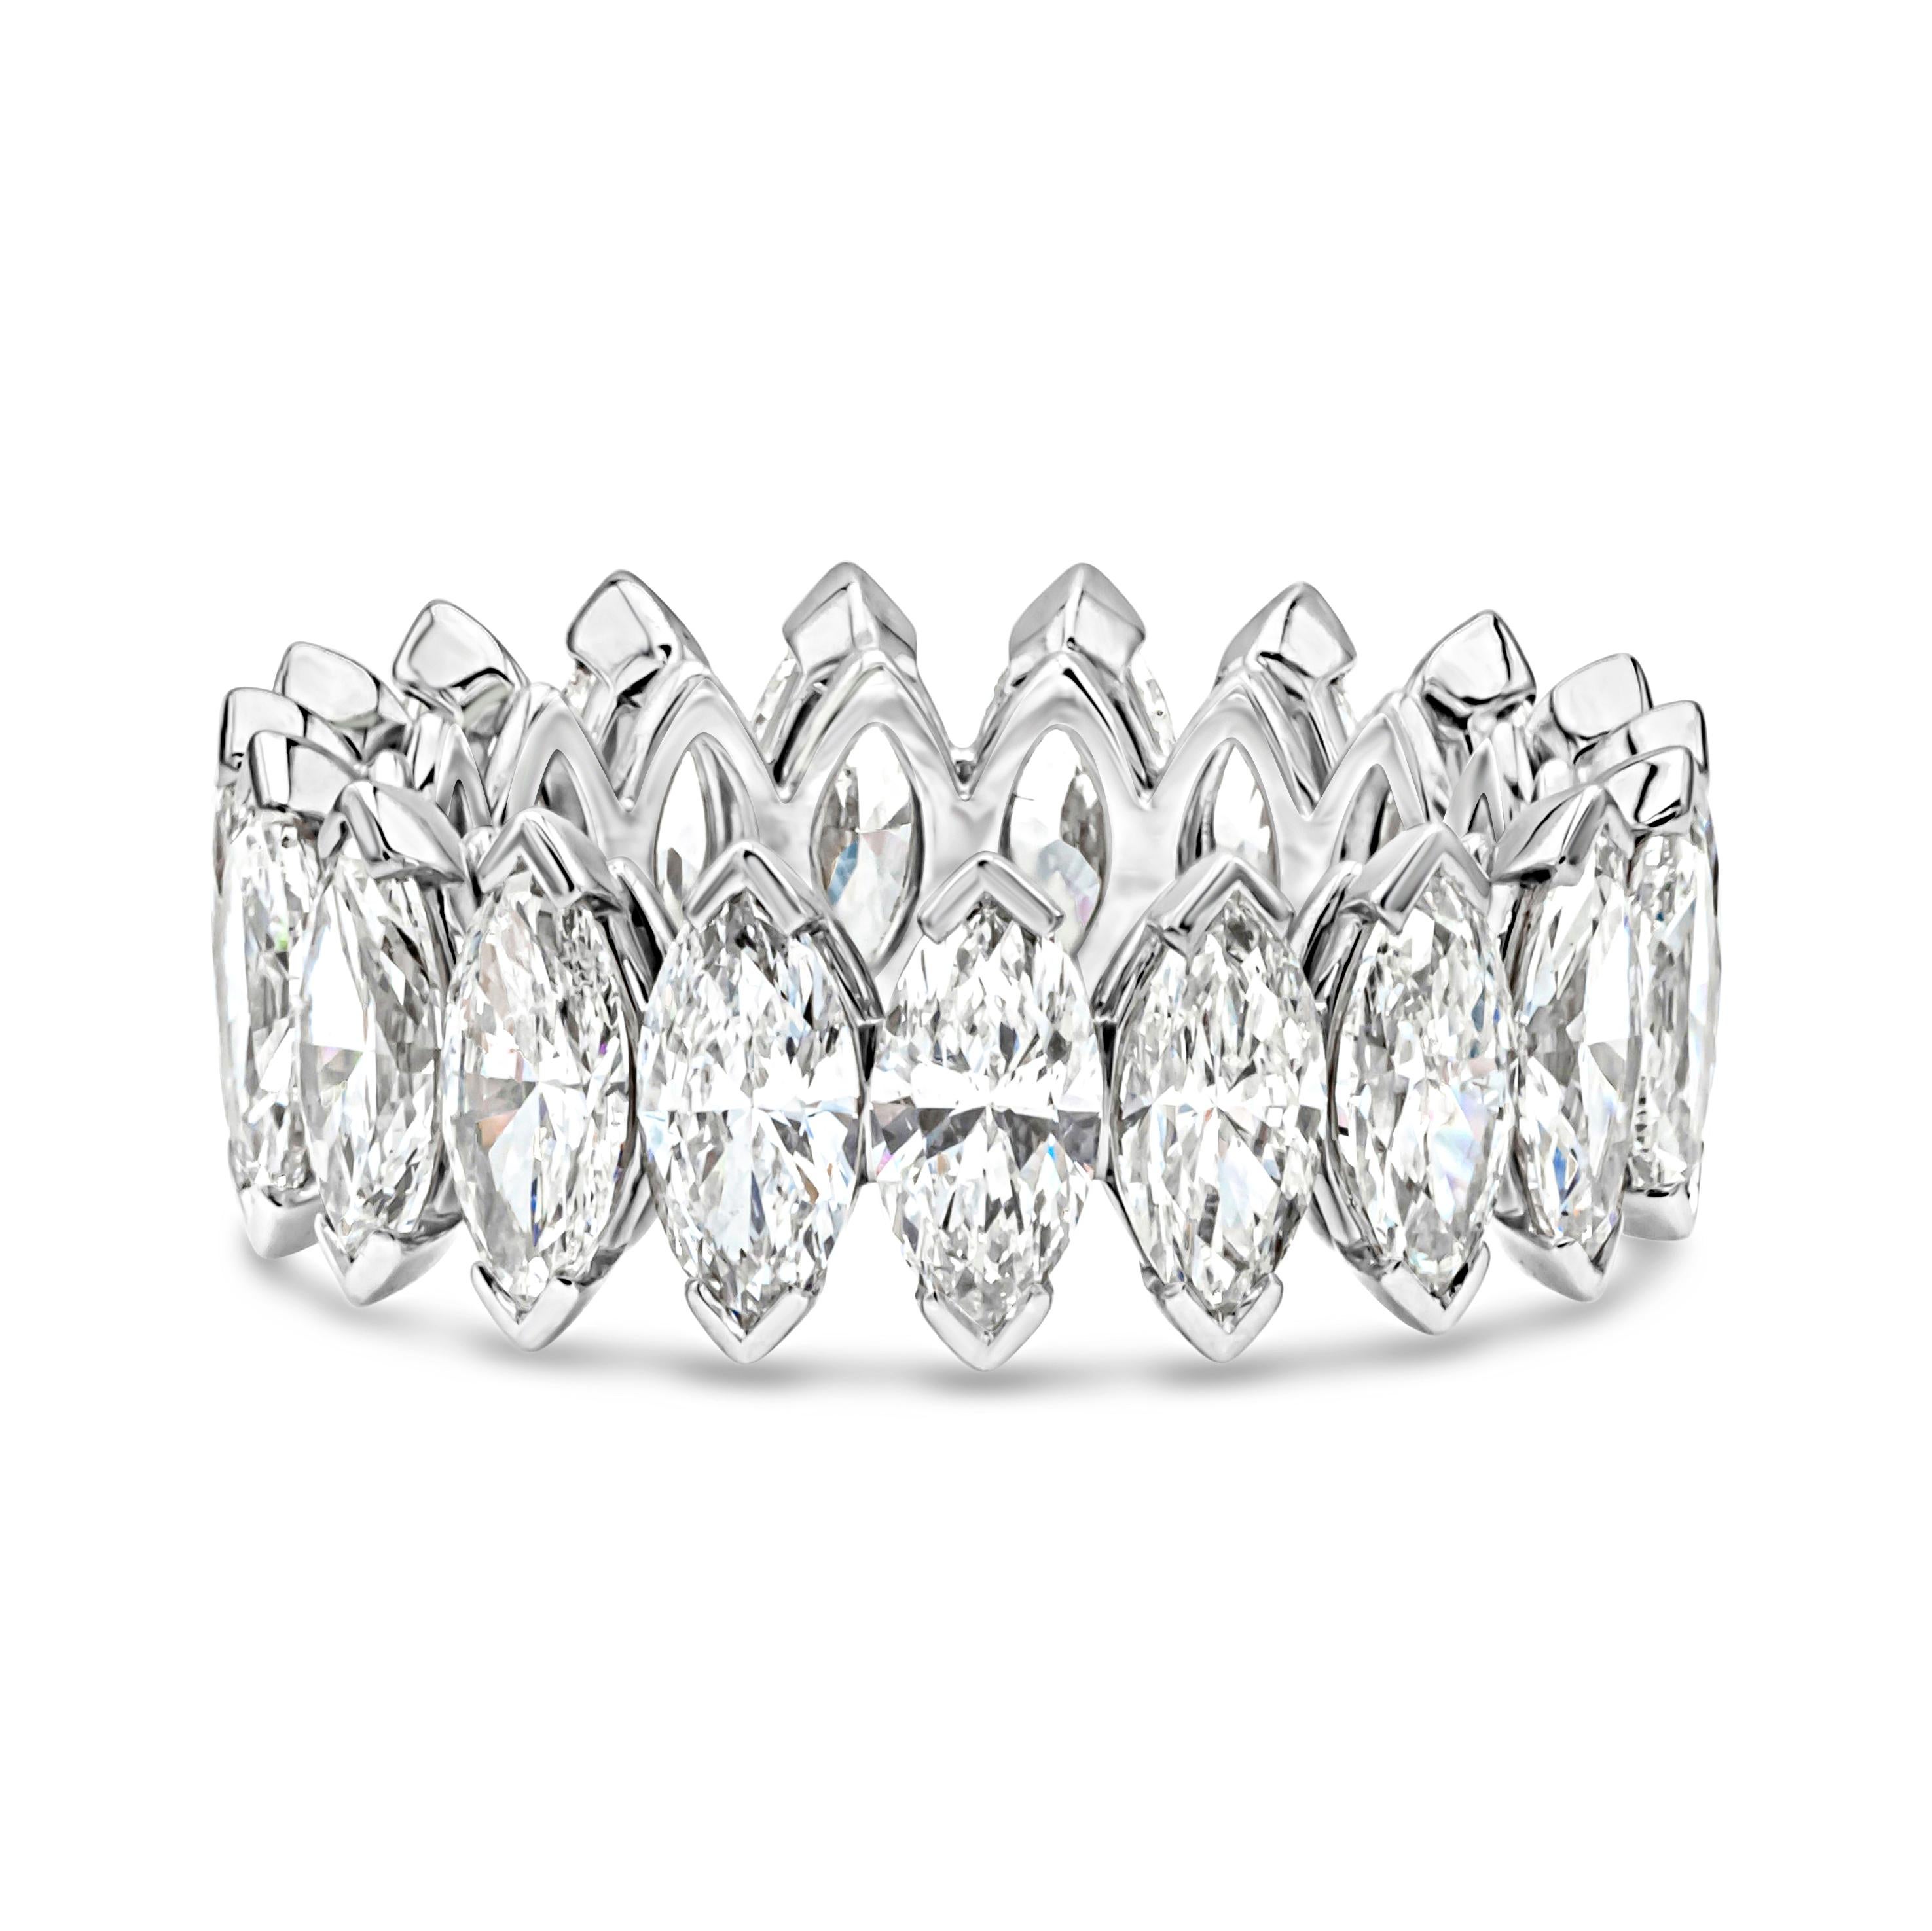 A beautiful and brilliant handcrafted wedding band style featuring a line of 19 brilliant marquise cut diamonds weighing 5.85 carats total, F+ color and VS-SI1 in clarity. Set in a polished platinum mounting and Size 6.5 US resizable upon